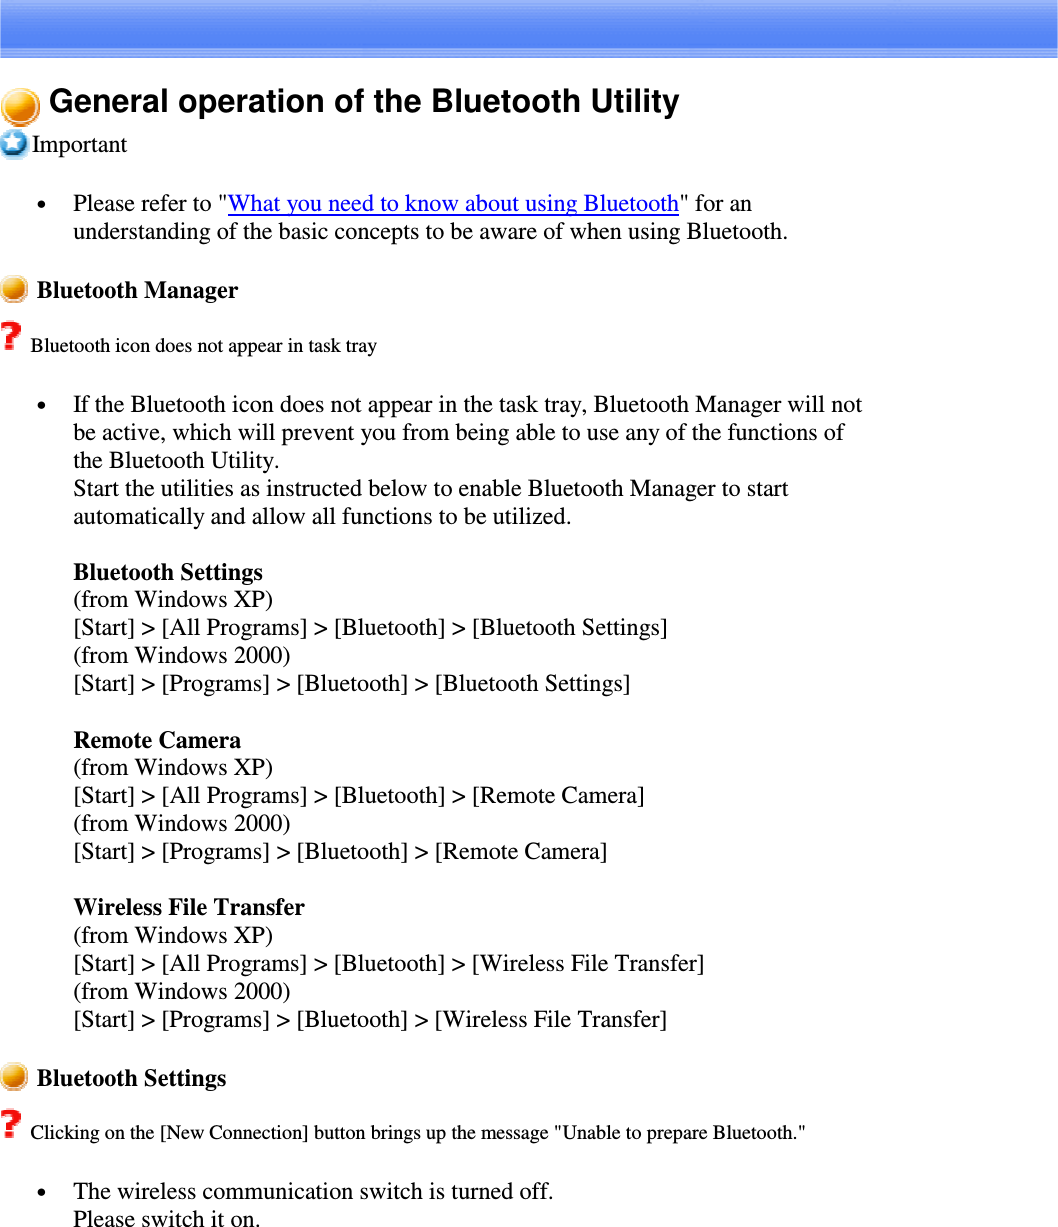 General operation of the Bluetooth UtilityImportant•  Please refer to &quot;What you need to know about using Bluetooth&quot;foranunderstanding of the basic concepts to be aware of when using Bluetooth.Bluetooth ManagerBluetooth icon does not appear in task tray•  If the Bluetooth icon does not appear in the task tray, Bluetooth Manager will notbe active, which will prevent you from being able to use any of the functions ofthe Bluetooth Utility.Start the utilities as instructed below to enable Bluetooth Manager to startautomatically and allow all functions to be utilized.Bluetooth Settings(from Windows XP)[Start] &gt; [All Programs] &gt; [Bluetooth] &gt; [Bluetooth Settings](from Windows 2000)[Start] &gt; [Programs] &gt; [Bluetooth] &gt; [Bluetooth Settings]Remote Camera(from Windows XP)[Start] &gt; [All Programs] &gt; [Bluetooth] &gt; [Remote Camera](from Windows 2000)[Start] &gt; [Programs] &gt; [Bluetooth] &gt; [Remote Camera]Wireless File Transfer(from Windows XP)[Start] &gt; [All Programs] &gt; [Bluetooth] &gt; [Wireless File Transfer](from Windows 2000)[Start] &gt; [Programs] &gt; [Bluetooth] &gt; [Wireless File Transfer]Bluetooth SettingsClicking on the [New Connection] button brings up the message &quot;Unable to prepare Bluetooth.&quot;•  The wireless communication switch is turned off.Please switch it on.